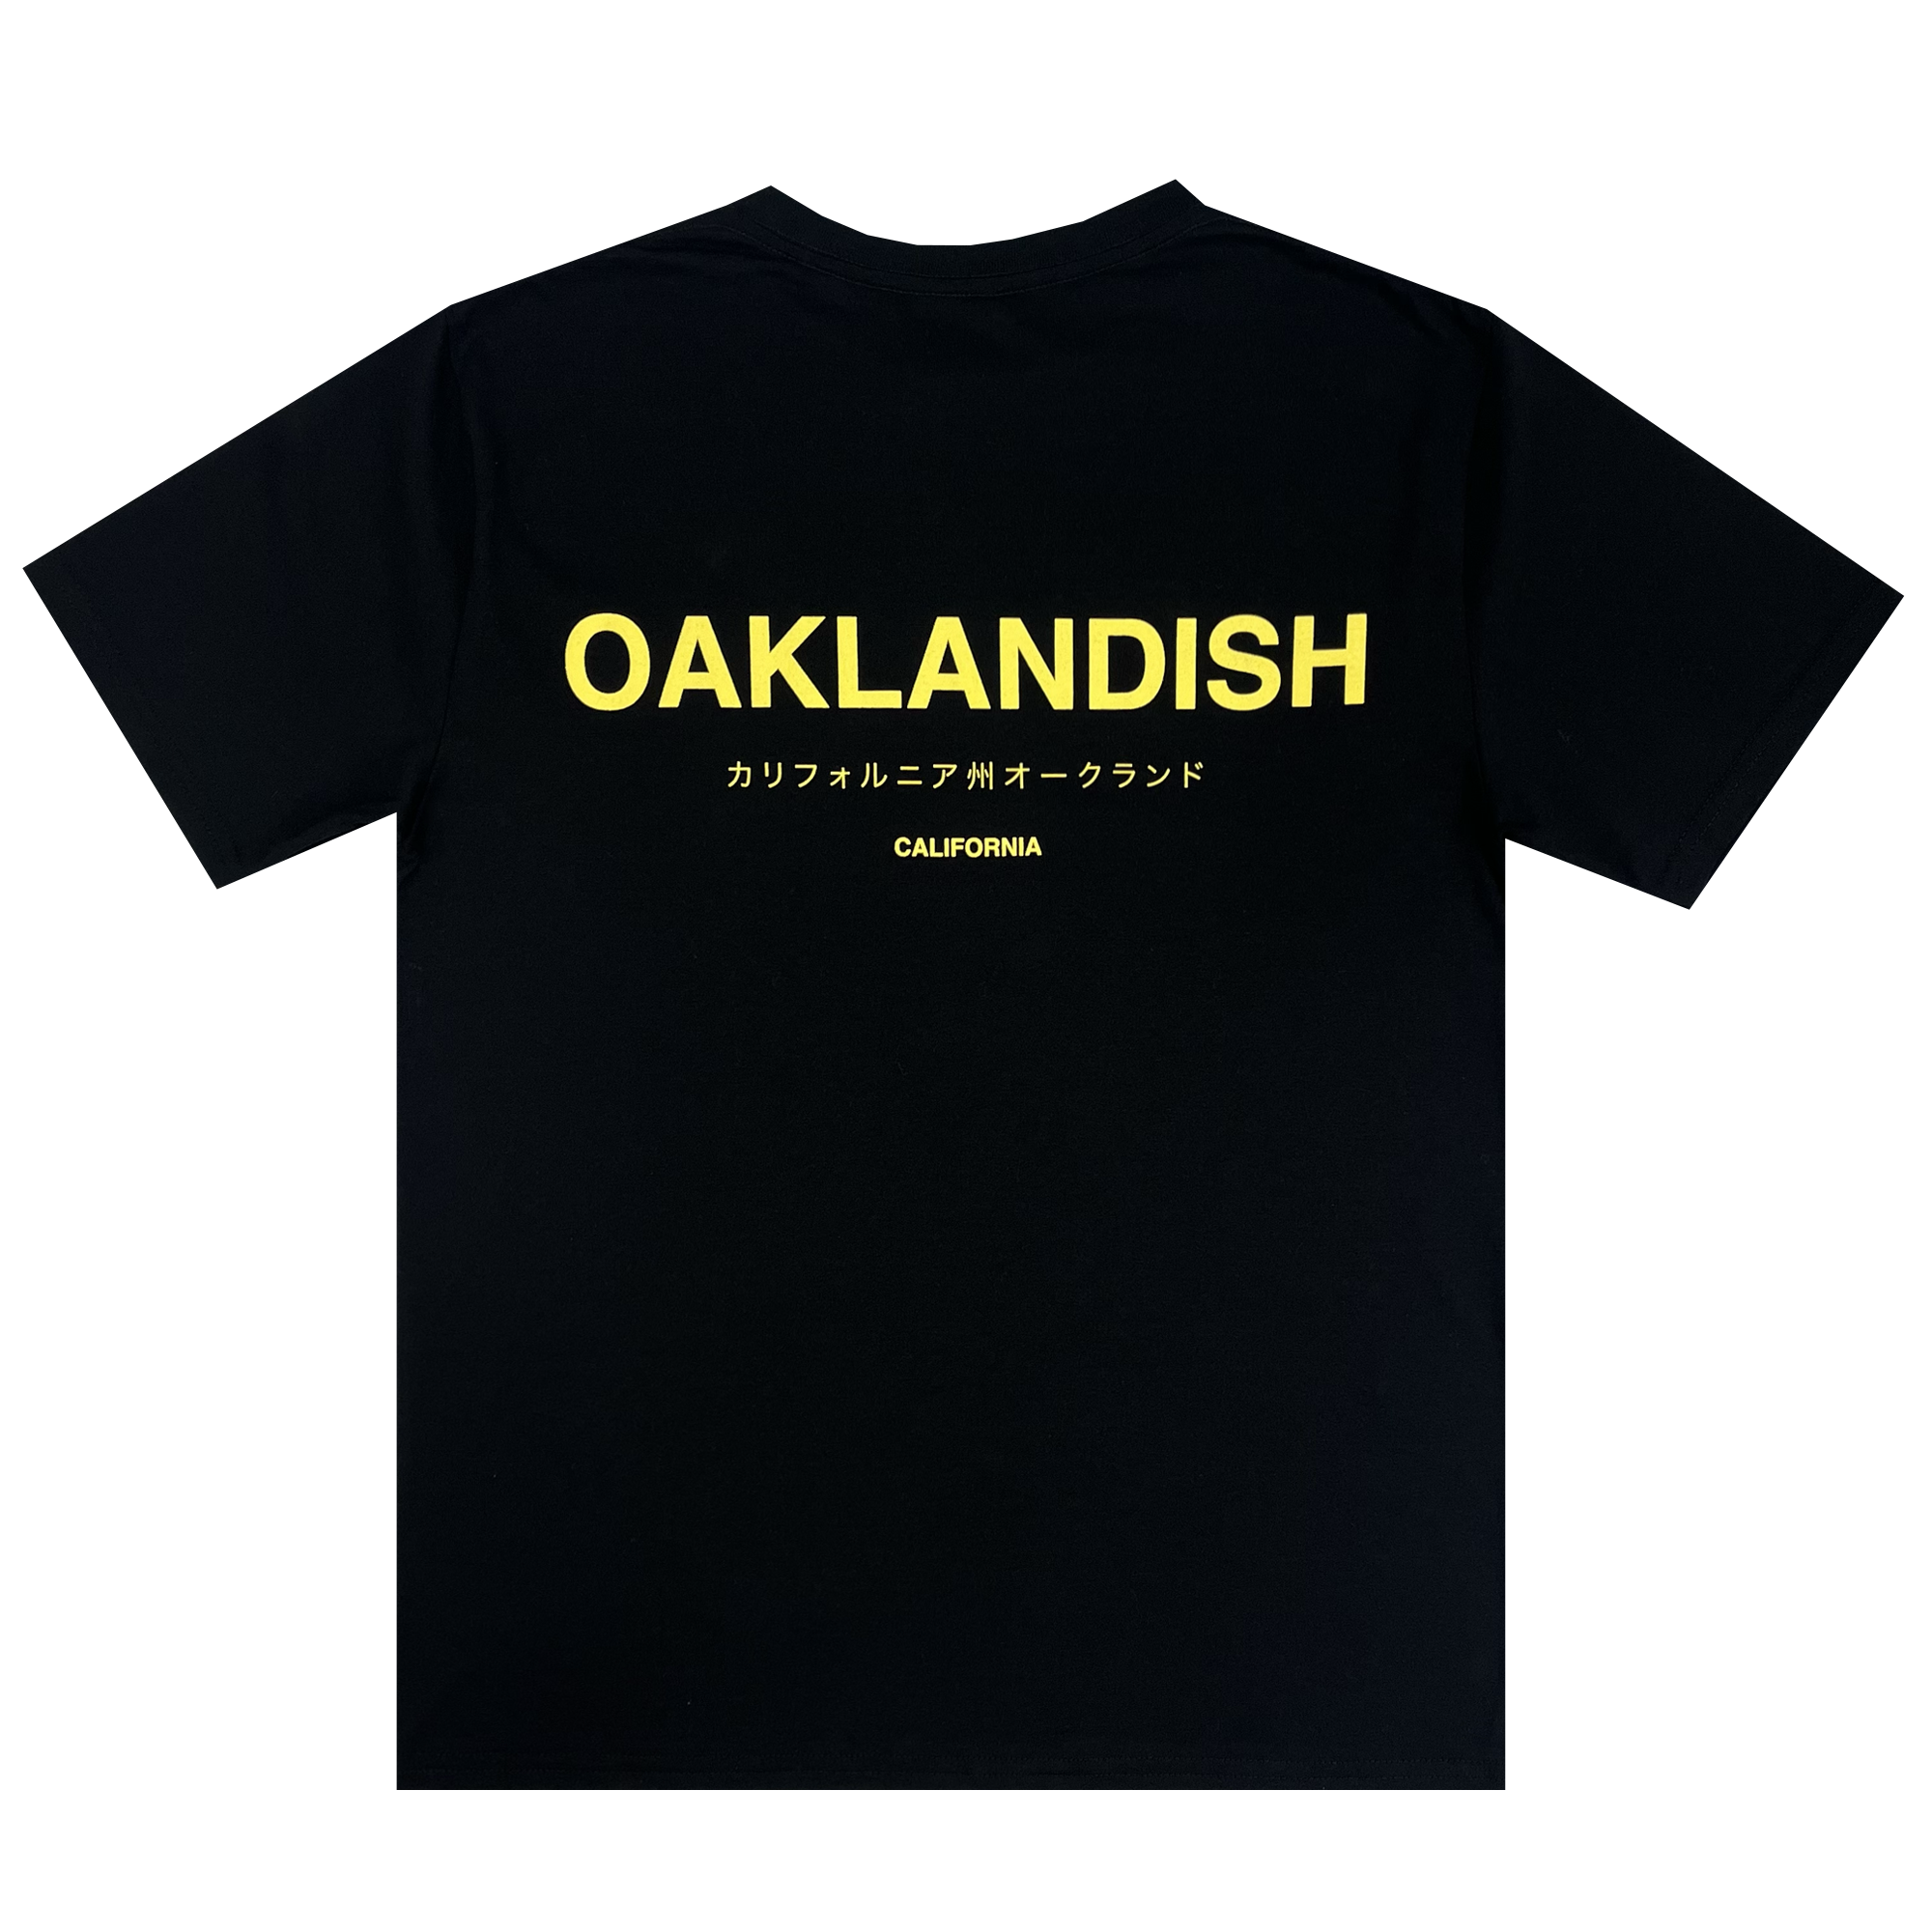 Back view of black cotton t-shirt with Oaklandish California wordmark in English and Japanese.